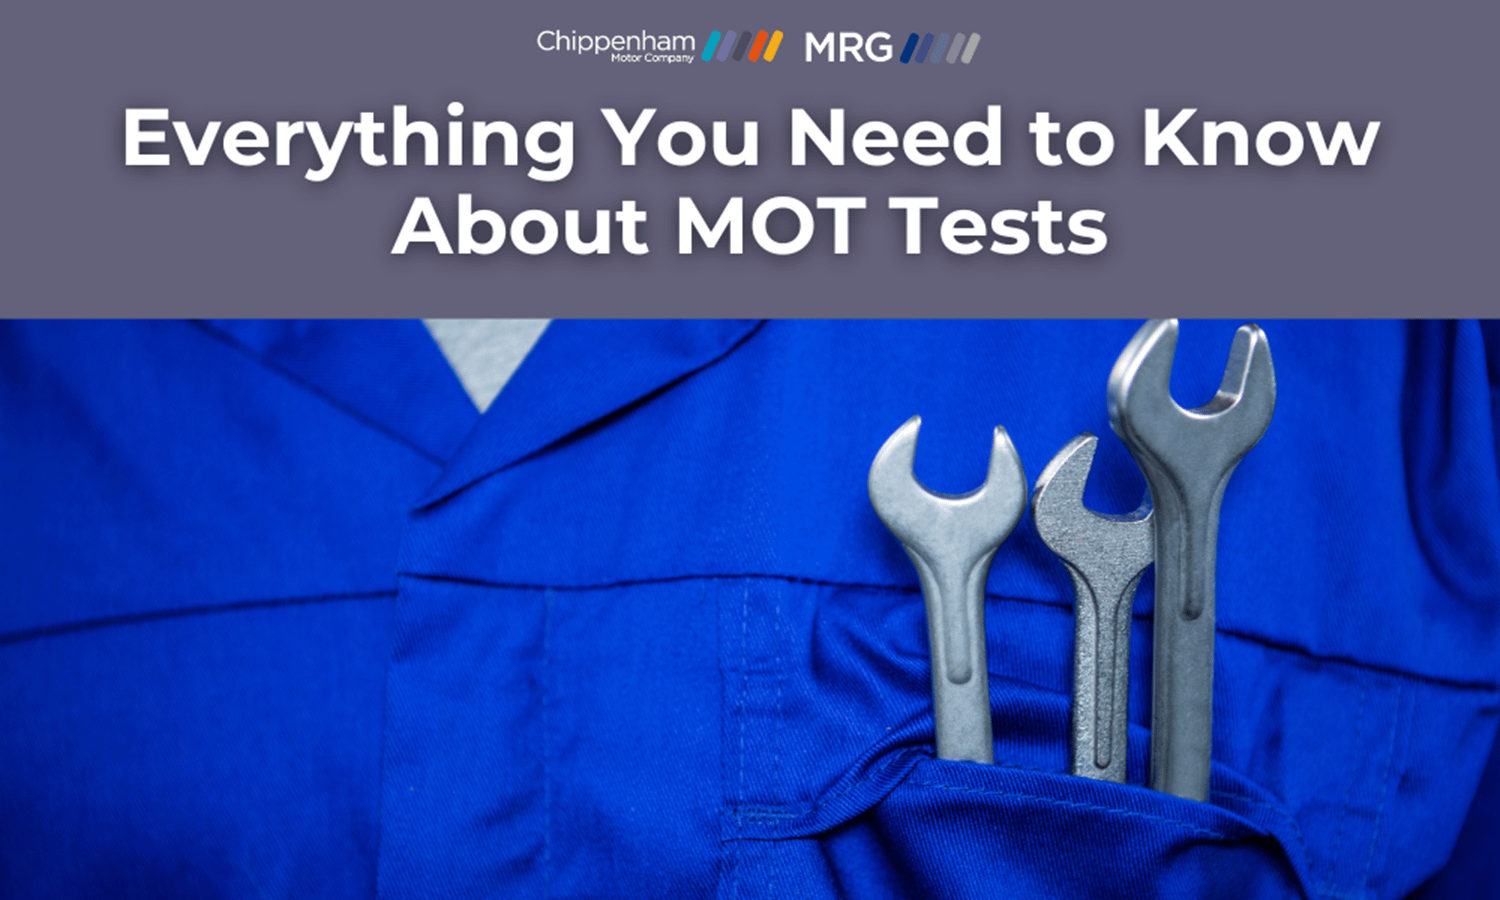 Everything you need to know about MOT tests